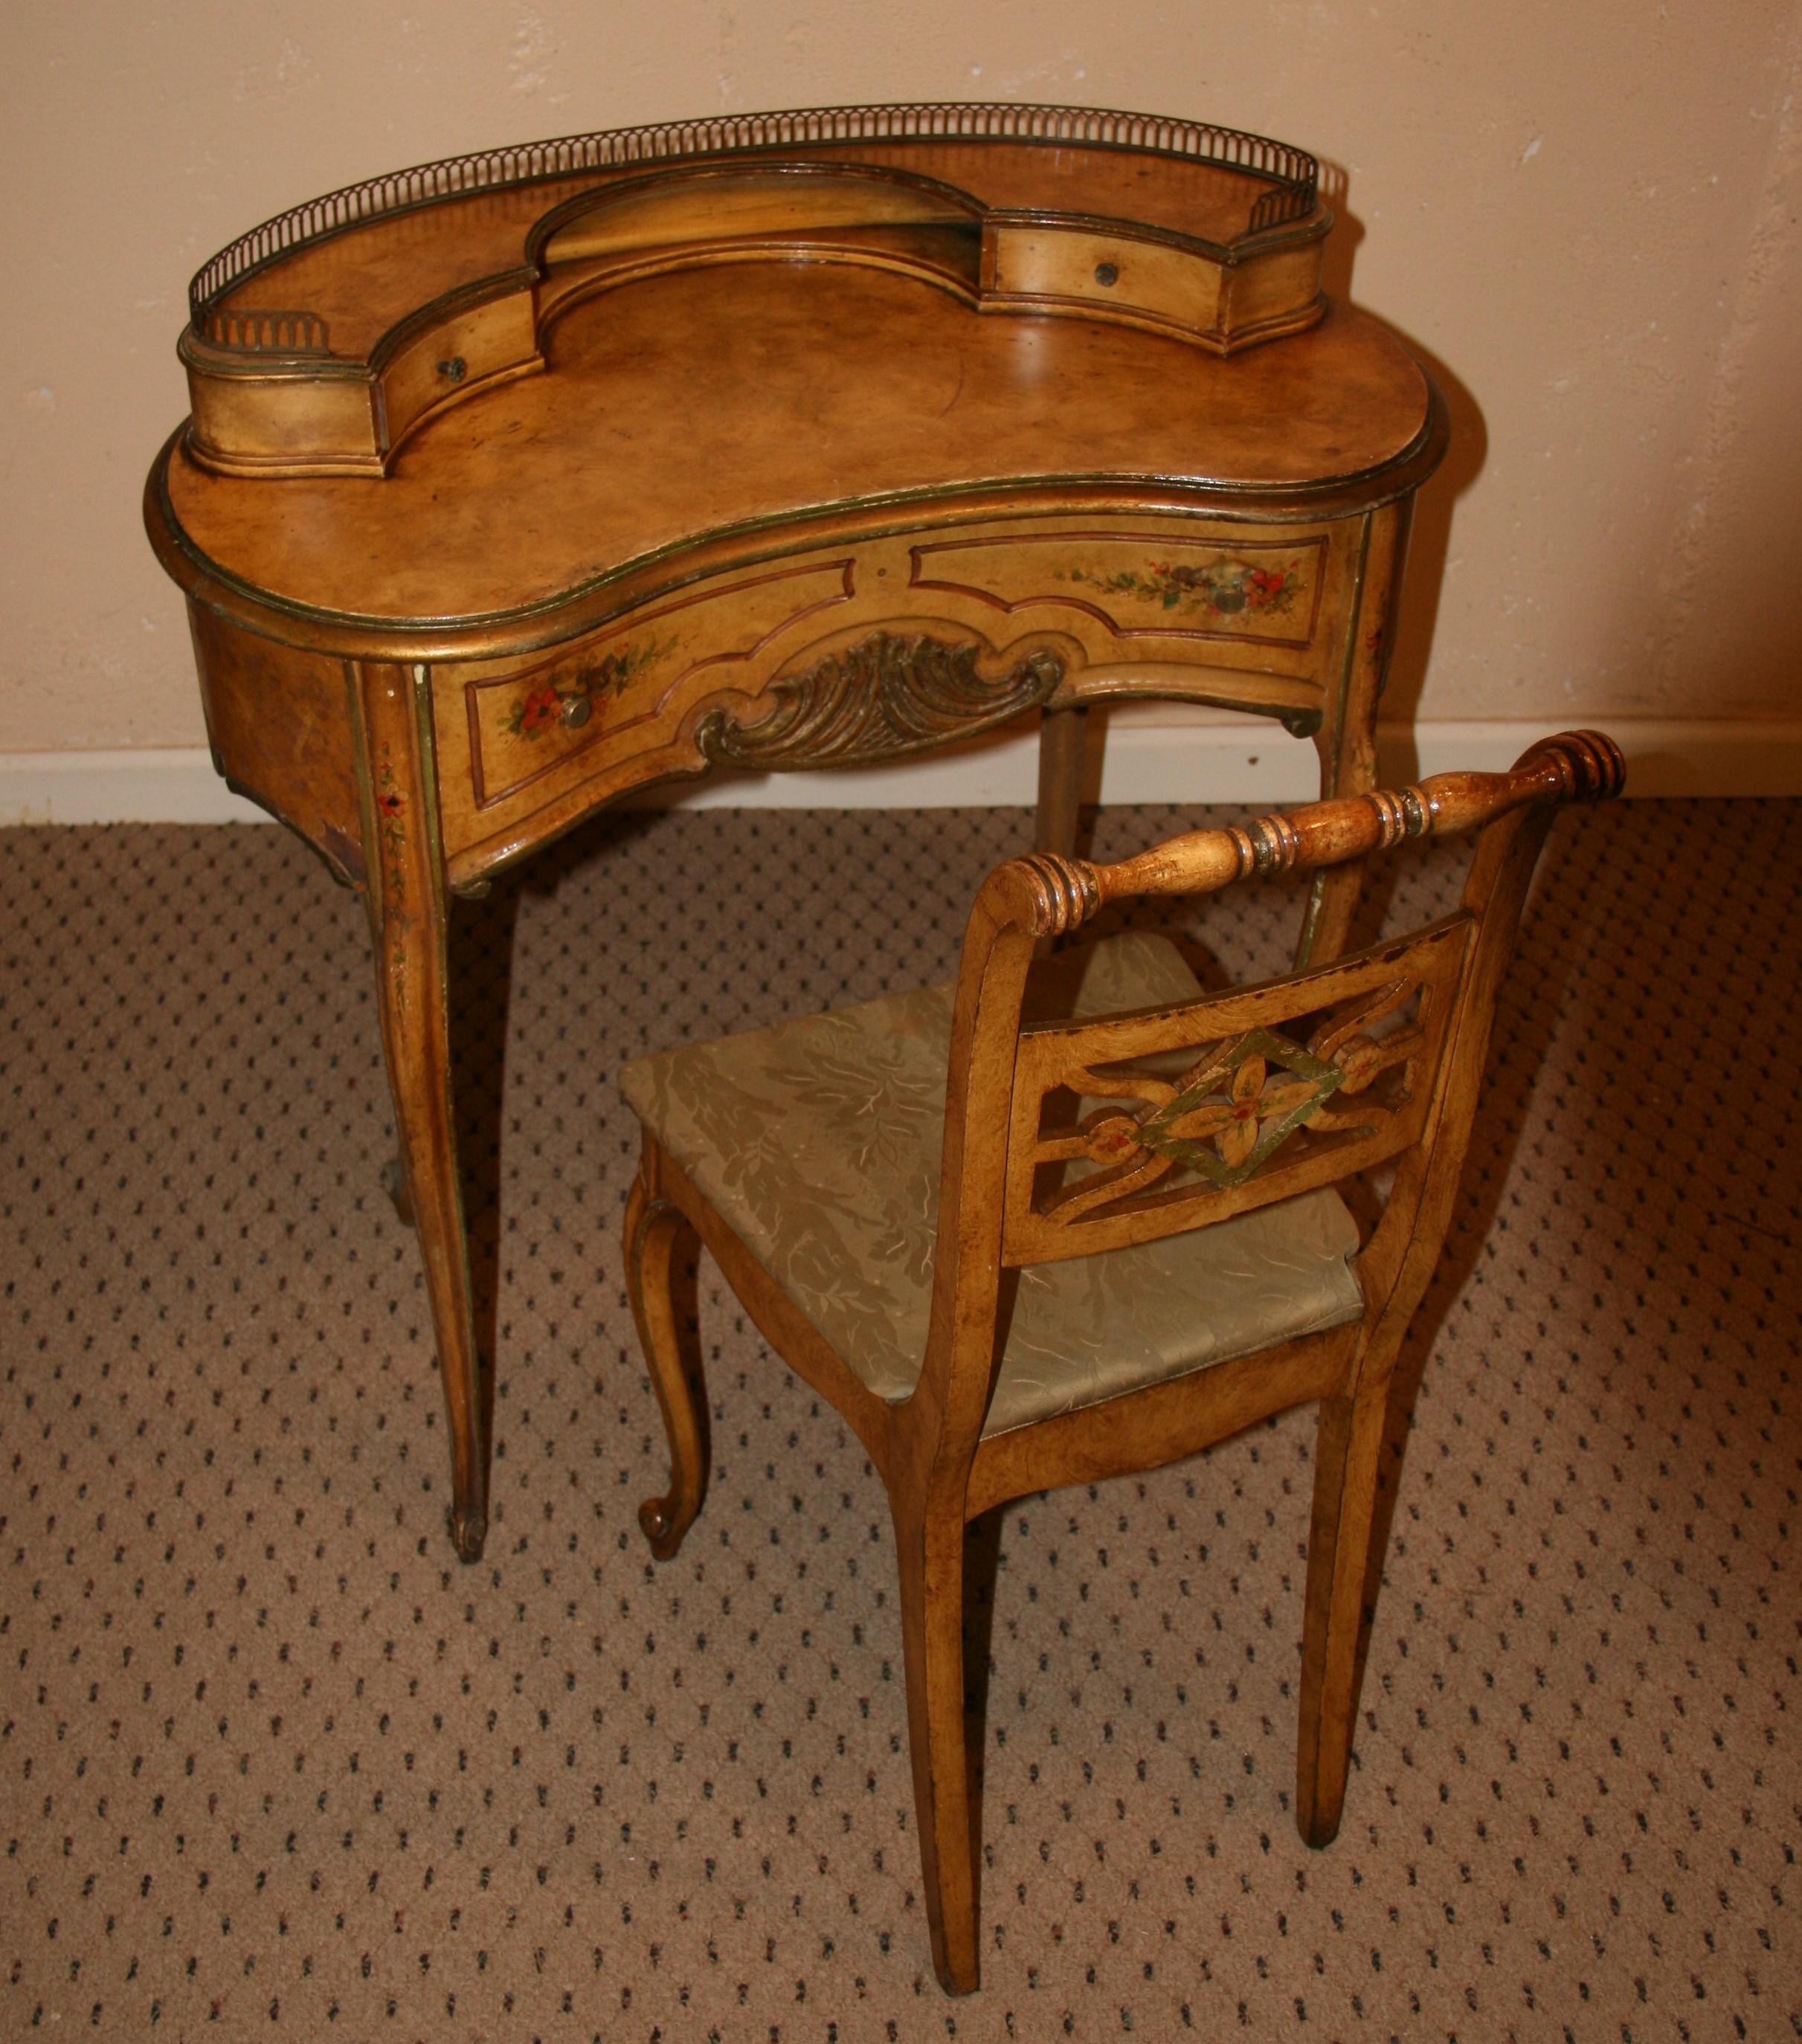 3-1072 Kidney shaped desk and matching chair with hand painting and carved detailing
Brass railing and two small drawers and large center drawer.
Chair 34